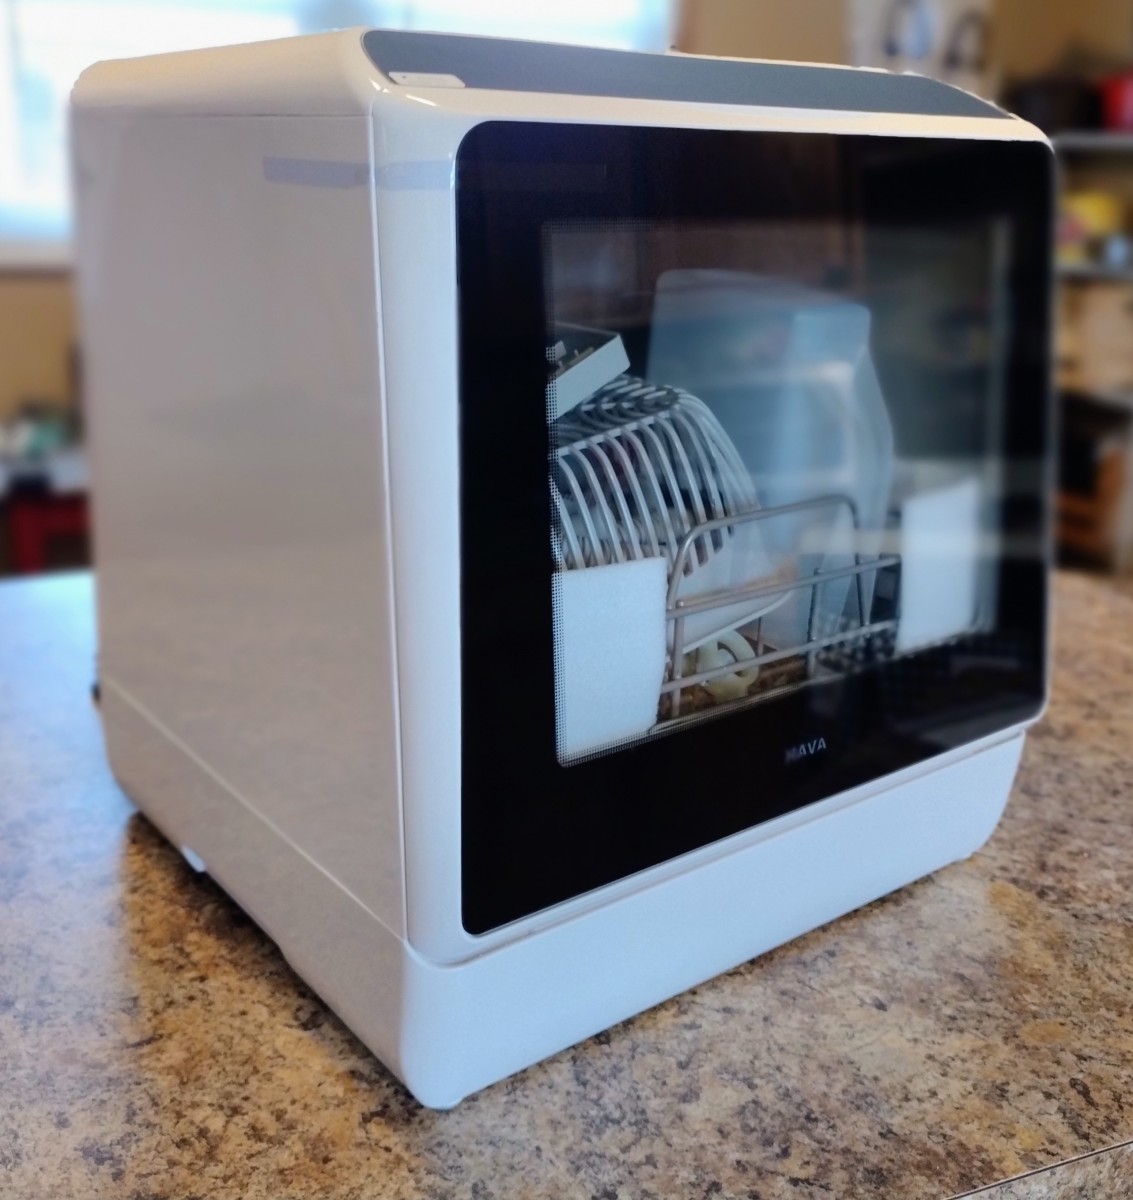 The HAVA-R01 Compact Portable Countertop Dishwasher: My Review and Opinion